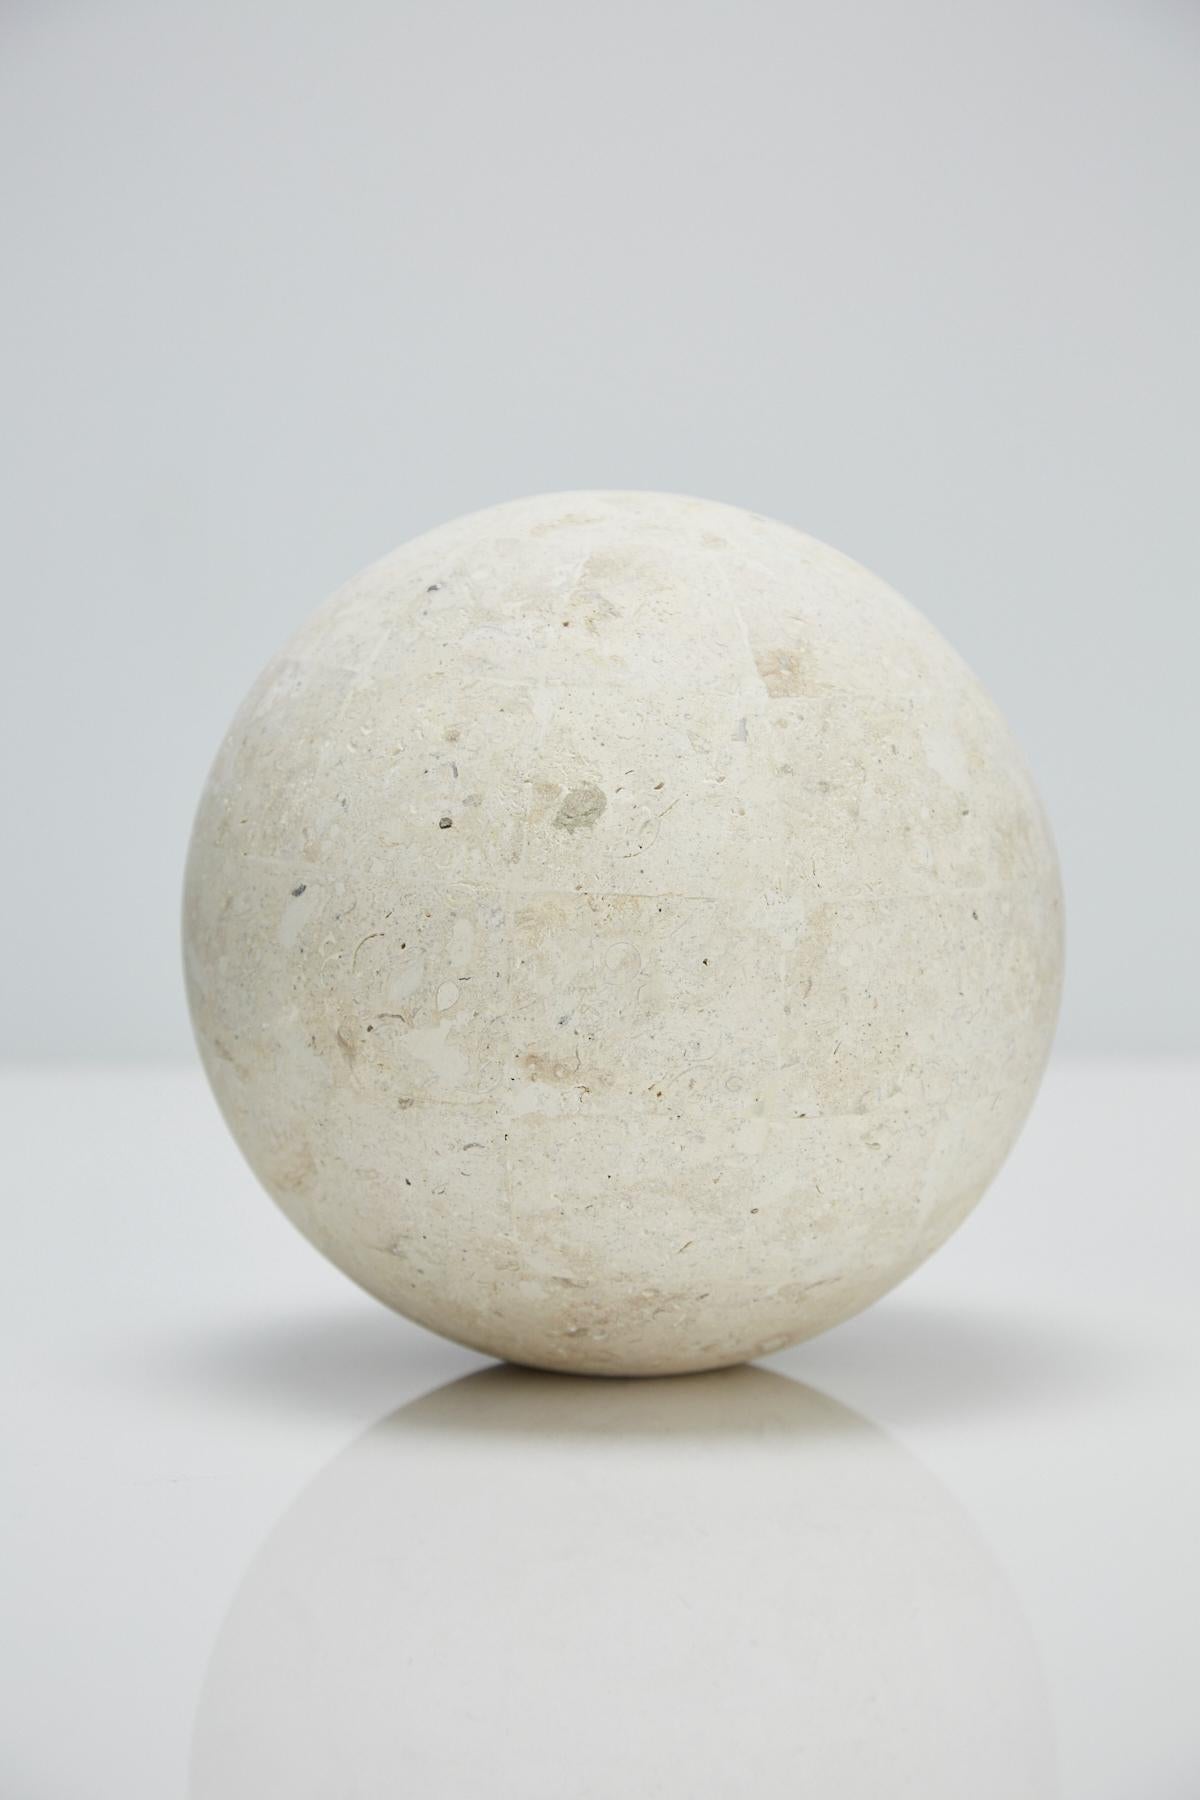 Postmodern tessellated stone sphere executed in matte Mactan stone over a fiberglass body. 

Measures: 7.5 in. diameter.

Pair available.

All furnishings are made from 100% natural Fossil Stone or Seashell inlay, carefully hand cut and crafted